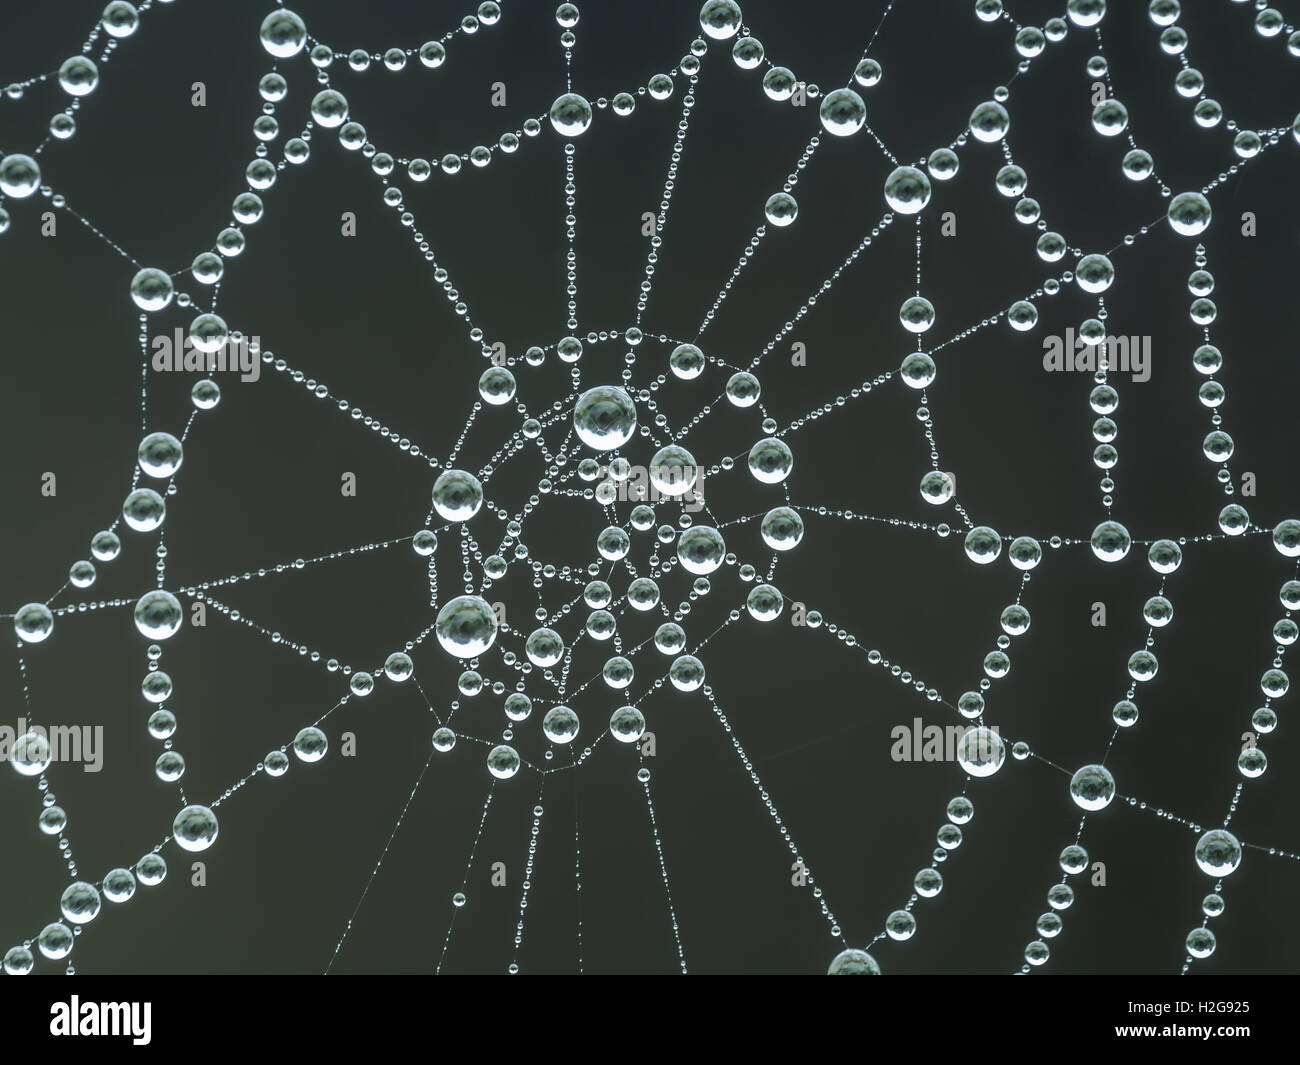 Spider web with morning dew droplets Stock Photo